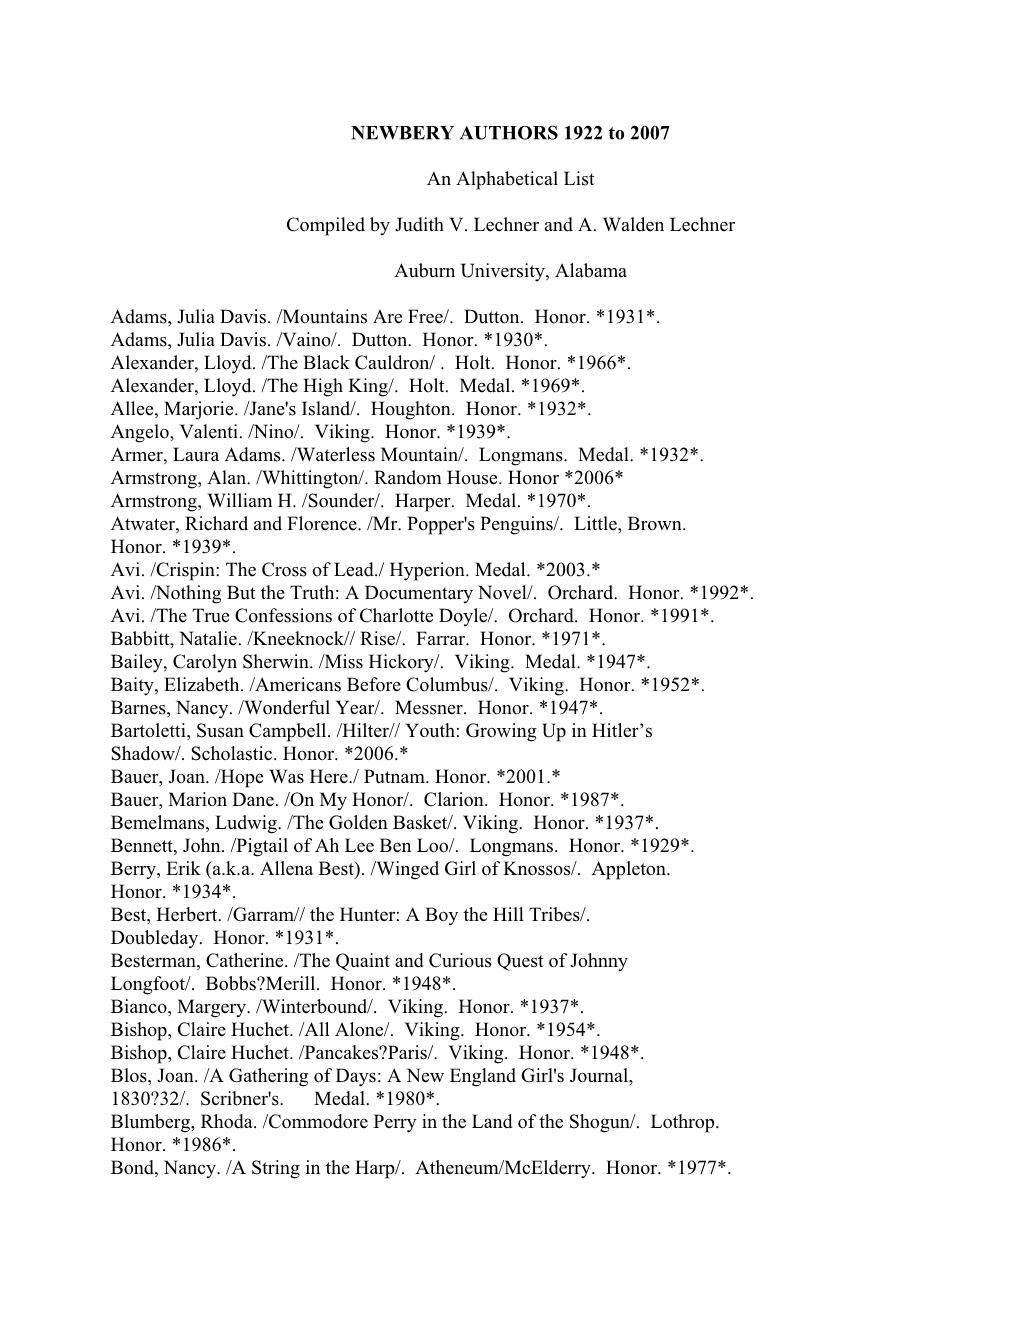 NEWBERY AUTHORS 1922 to 2007 an Alphabetical List Compiled by Judith V. Lechner and A. Walden Lechner Auburn University, Alabama